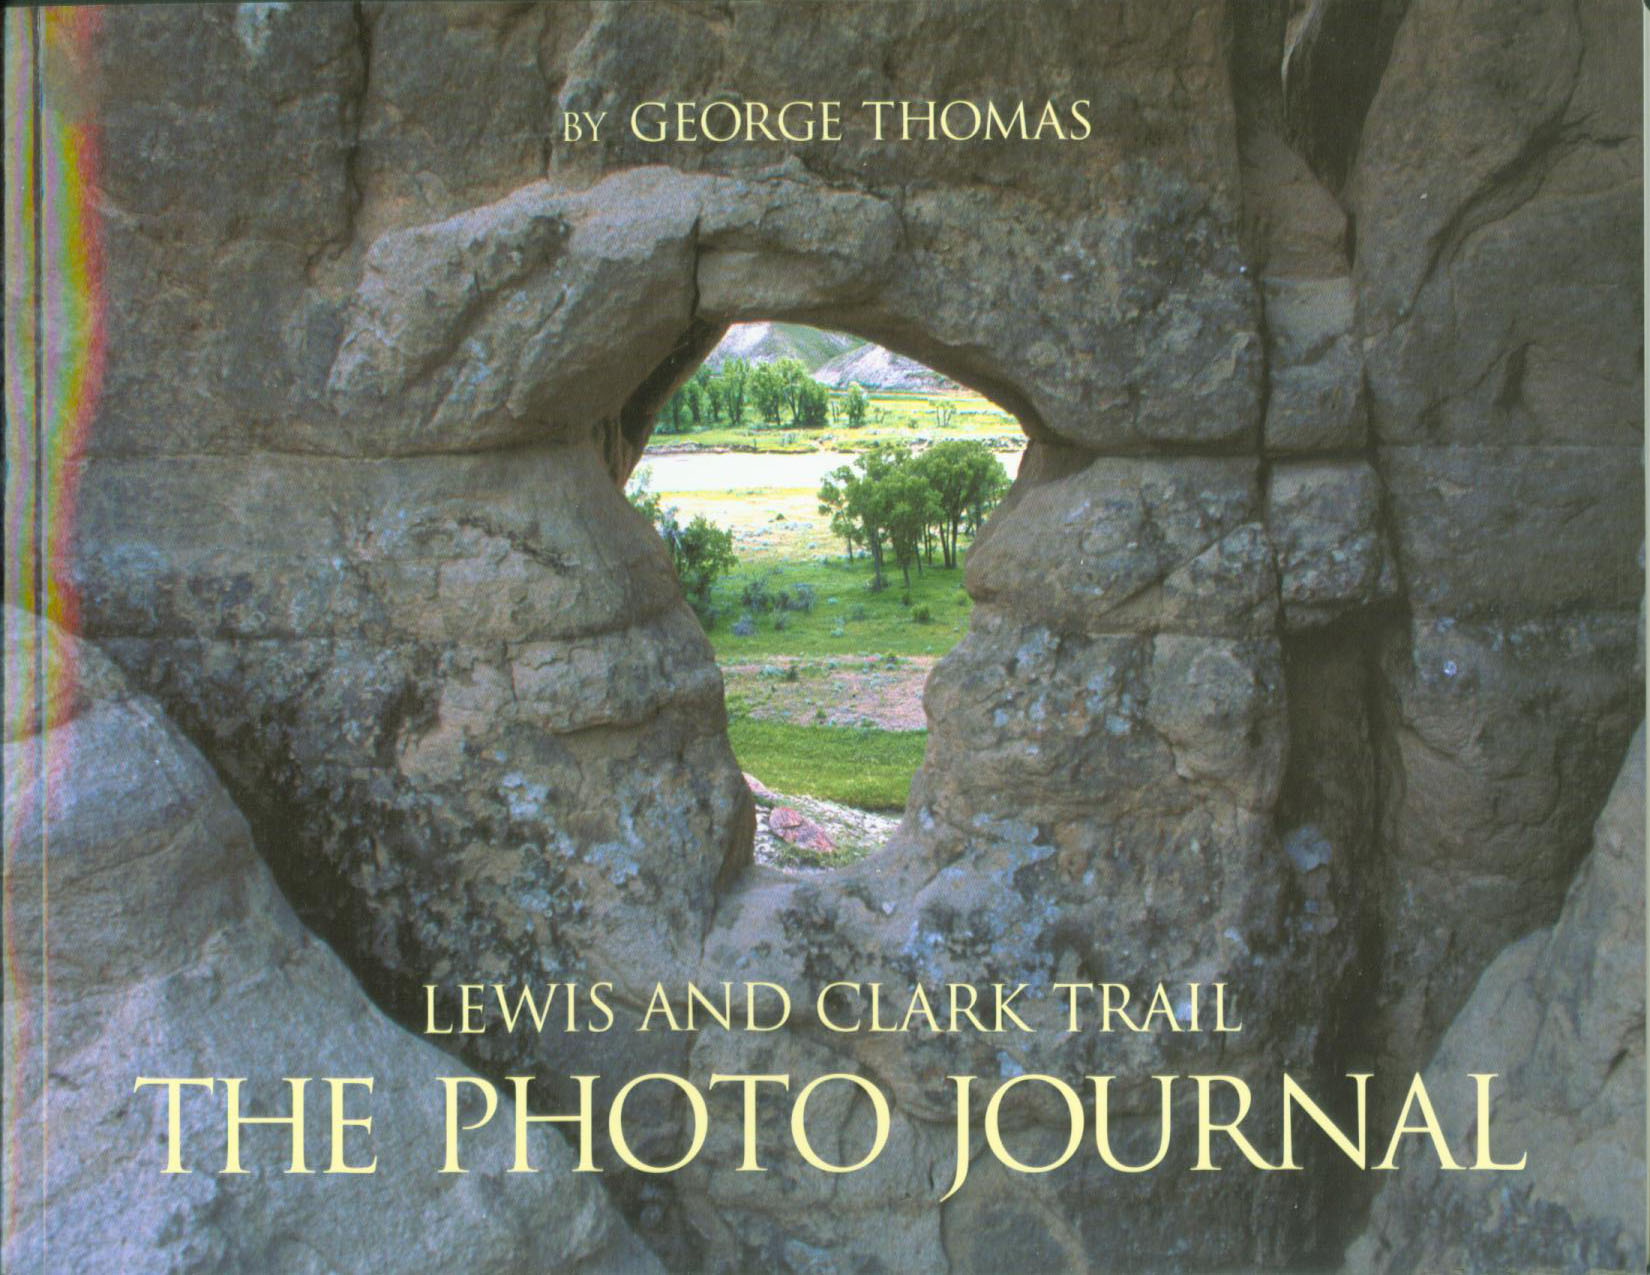 LEWIS AND CLARK TRAIL (THE): the photo journal.